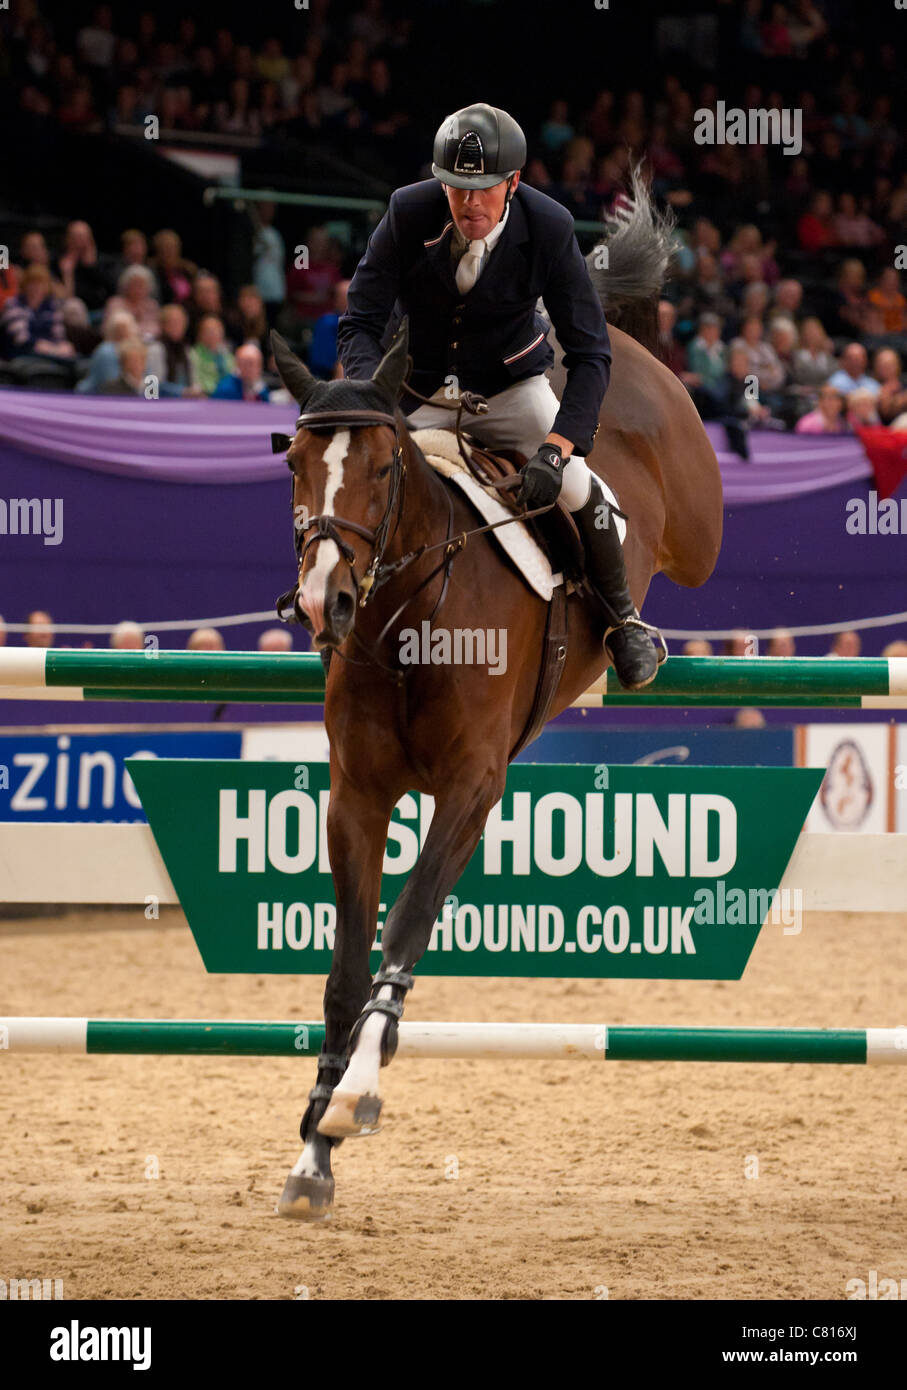 Guy Williams and Djakarta clear the last during the jump-off to win the Horse & Hound Foxhunter Championship 2011 Stock Photo